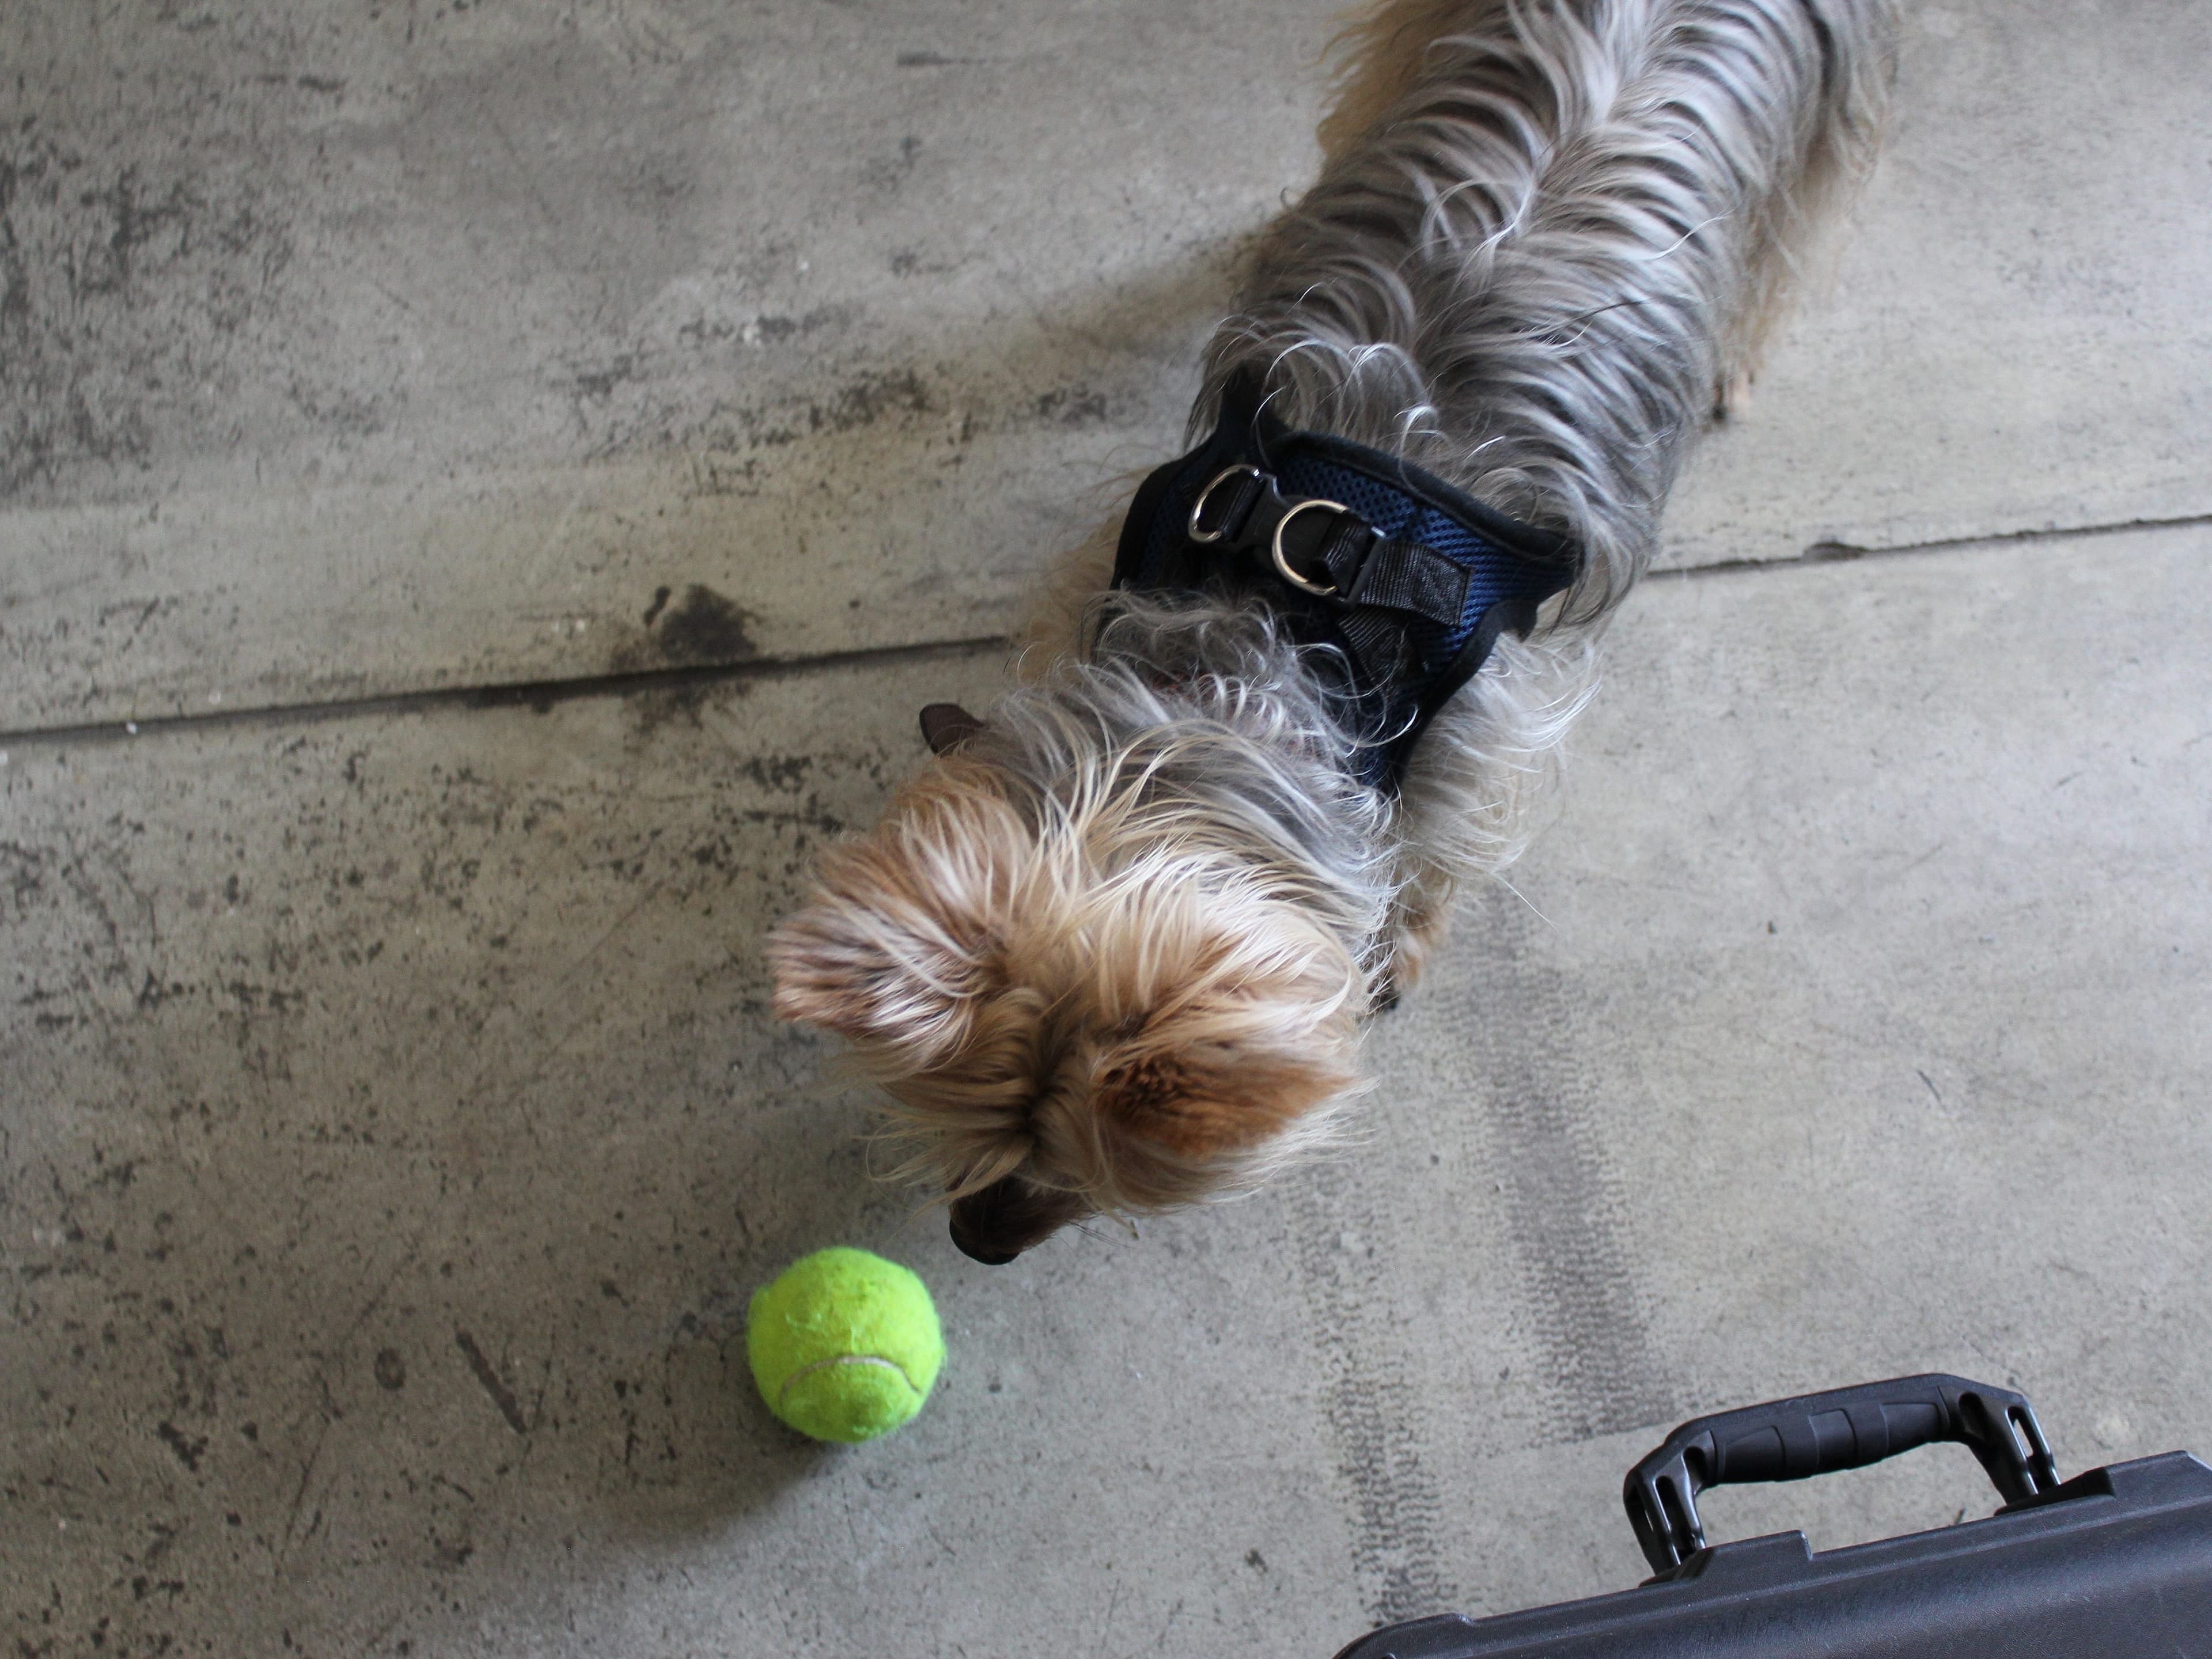 A small, fluffy dog with a harness sniffs a yellow tennis ball on a concrete floor. A black suitcase handle is visible in the bottom right corner of the image.